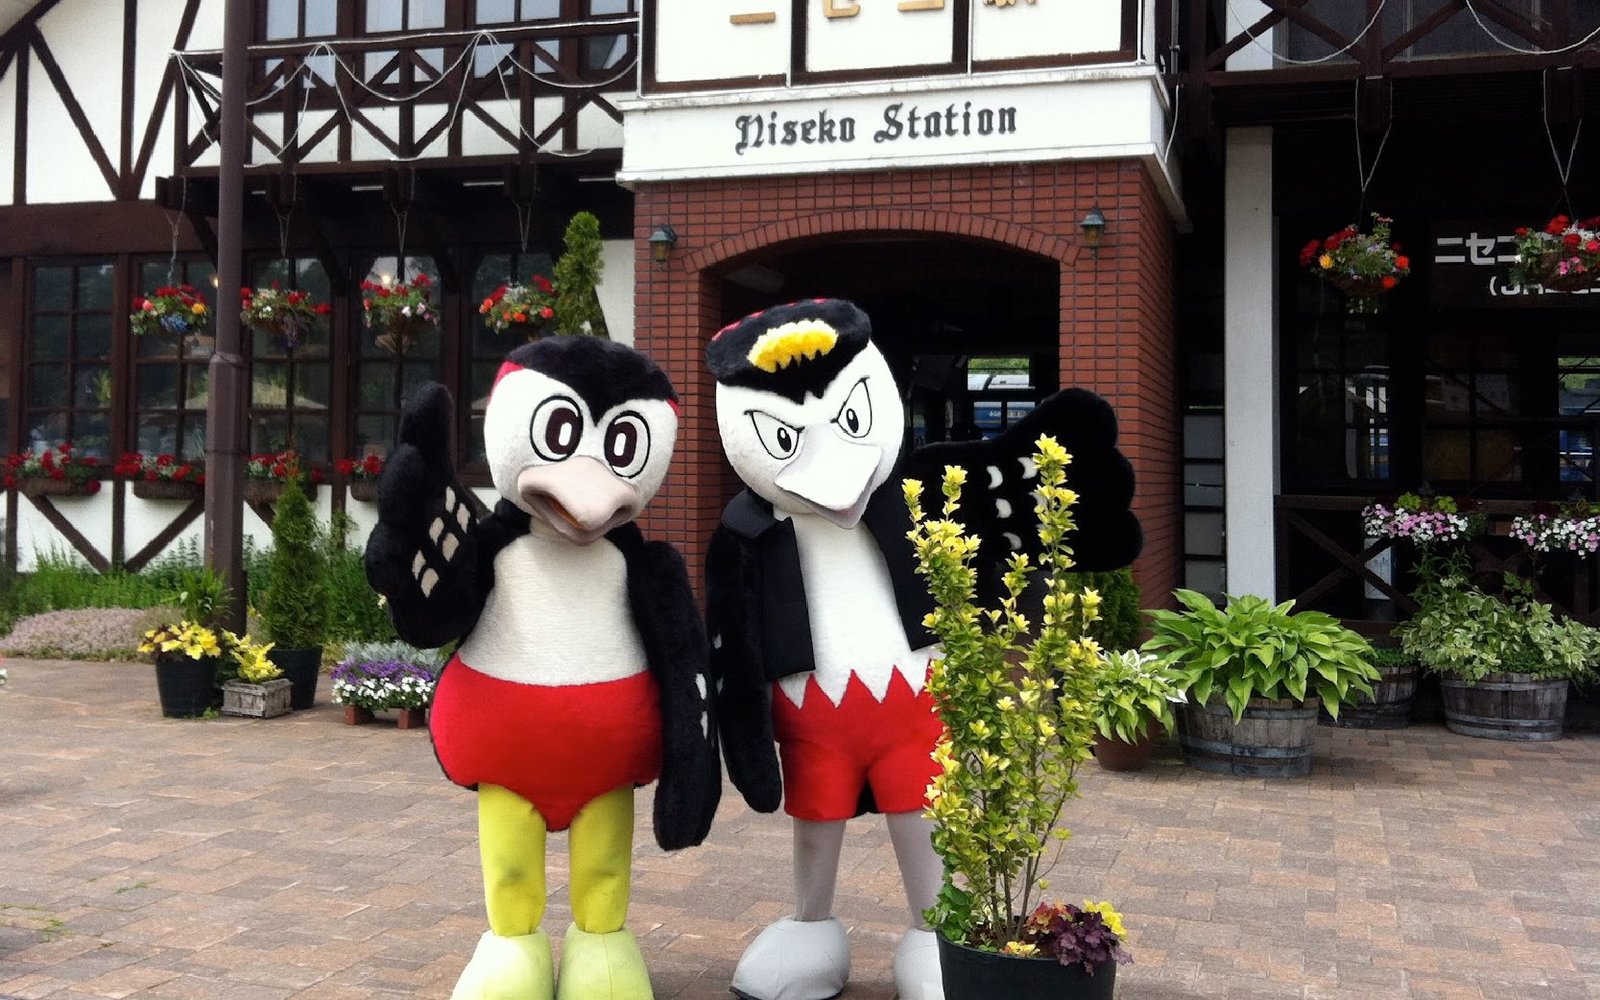 anniky and nicky are the twin mascots of niseko town japan